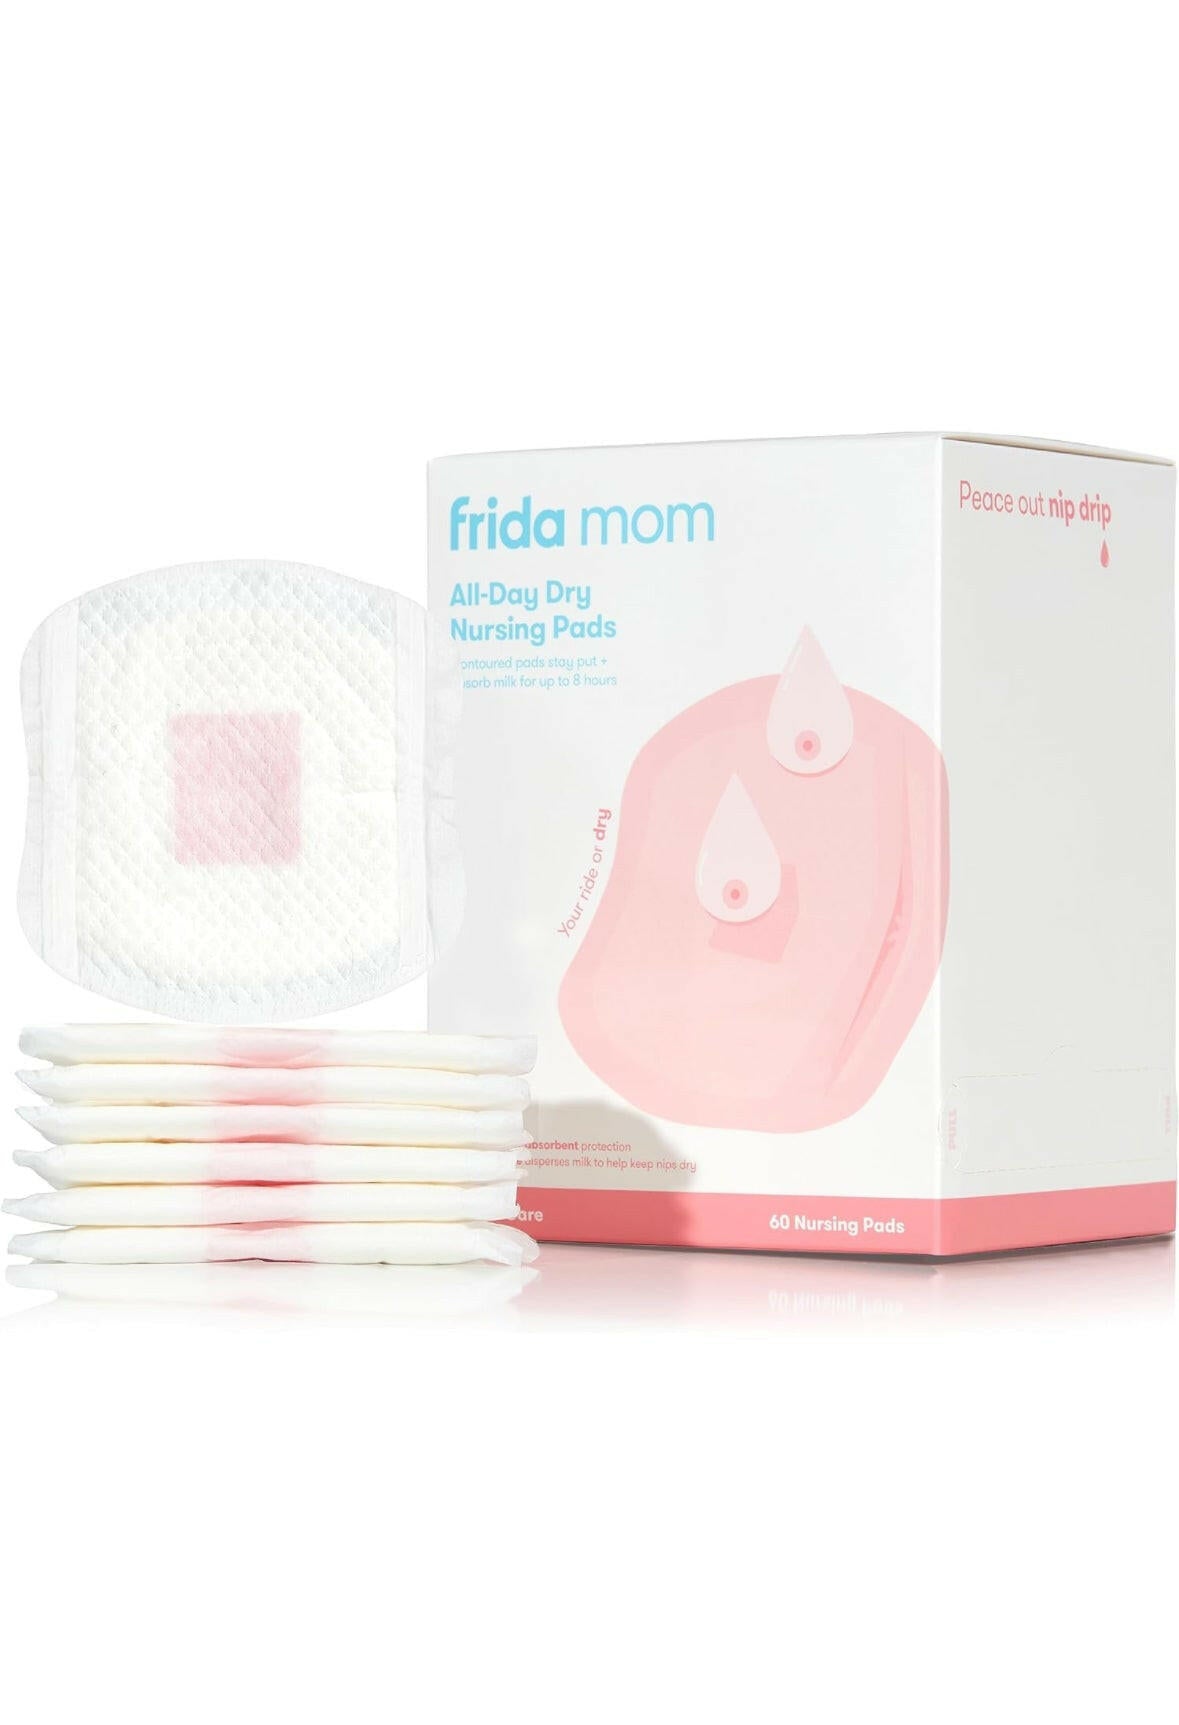 Frida Mom All-Day Dry Disposable Nursing Pads - Soft and Ultra-Absorbent Breast Pads, Breastfeeding Essentials for Moms, 60 Count